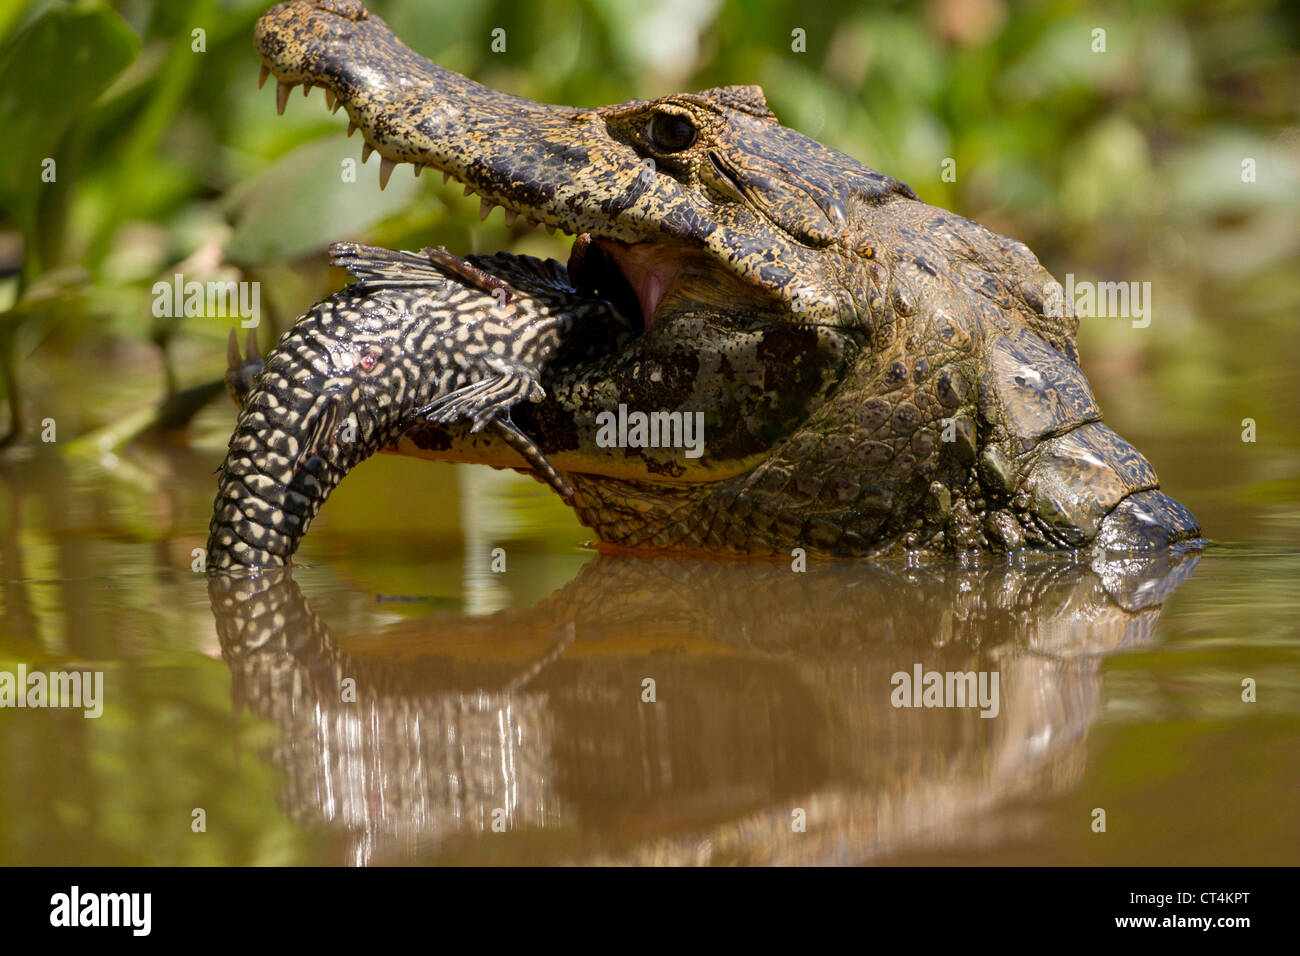 South America, Brazil, Pantanal, Moto Grosso, Spectacled Caiman, Caiman crocodilus, eating fish, Stock Photo